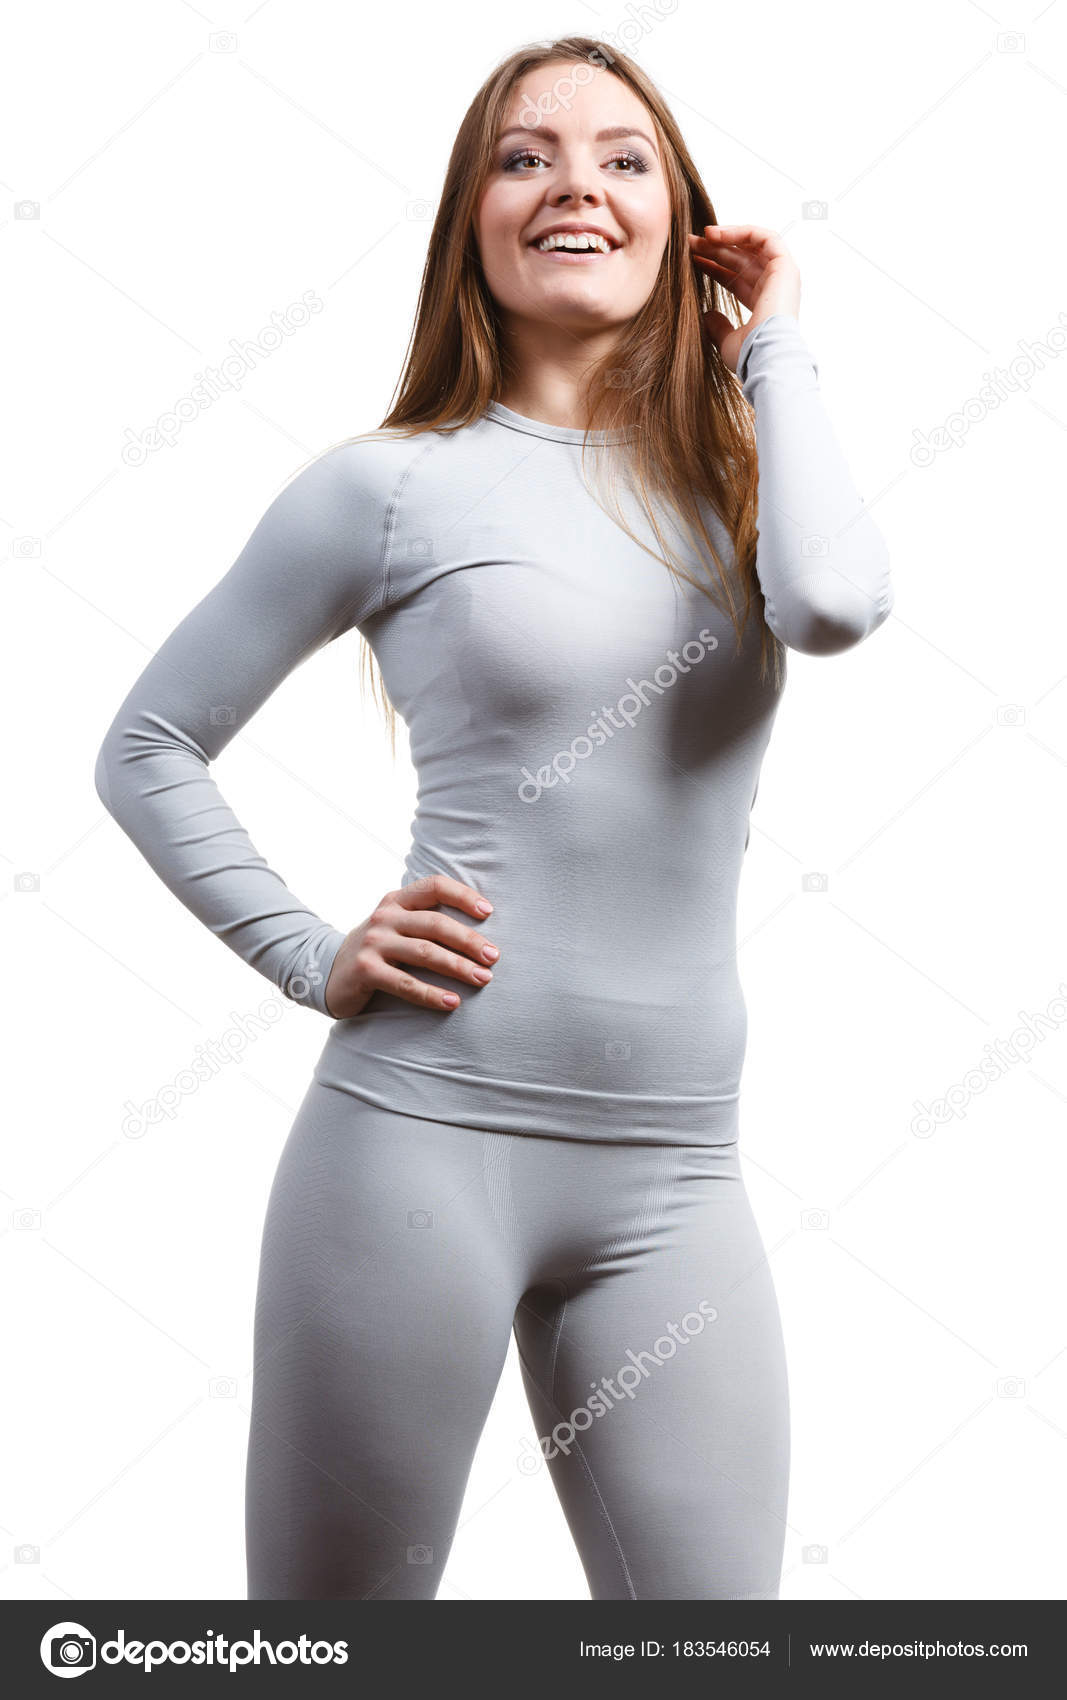 Woman with sportive figure in tights underwear Stock Photo by